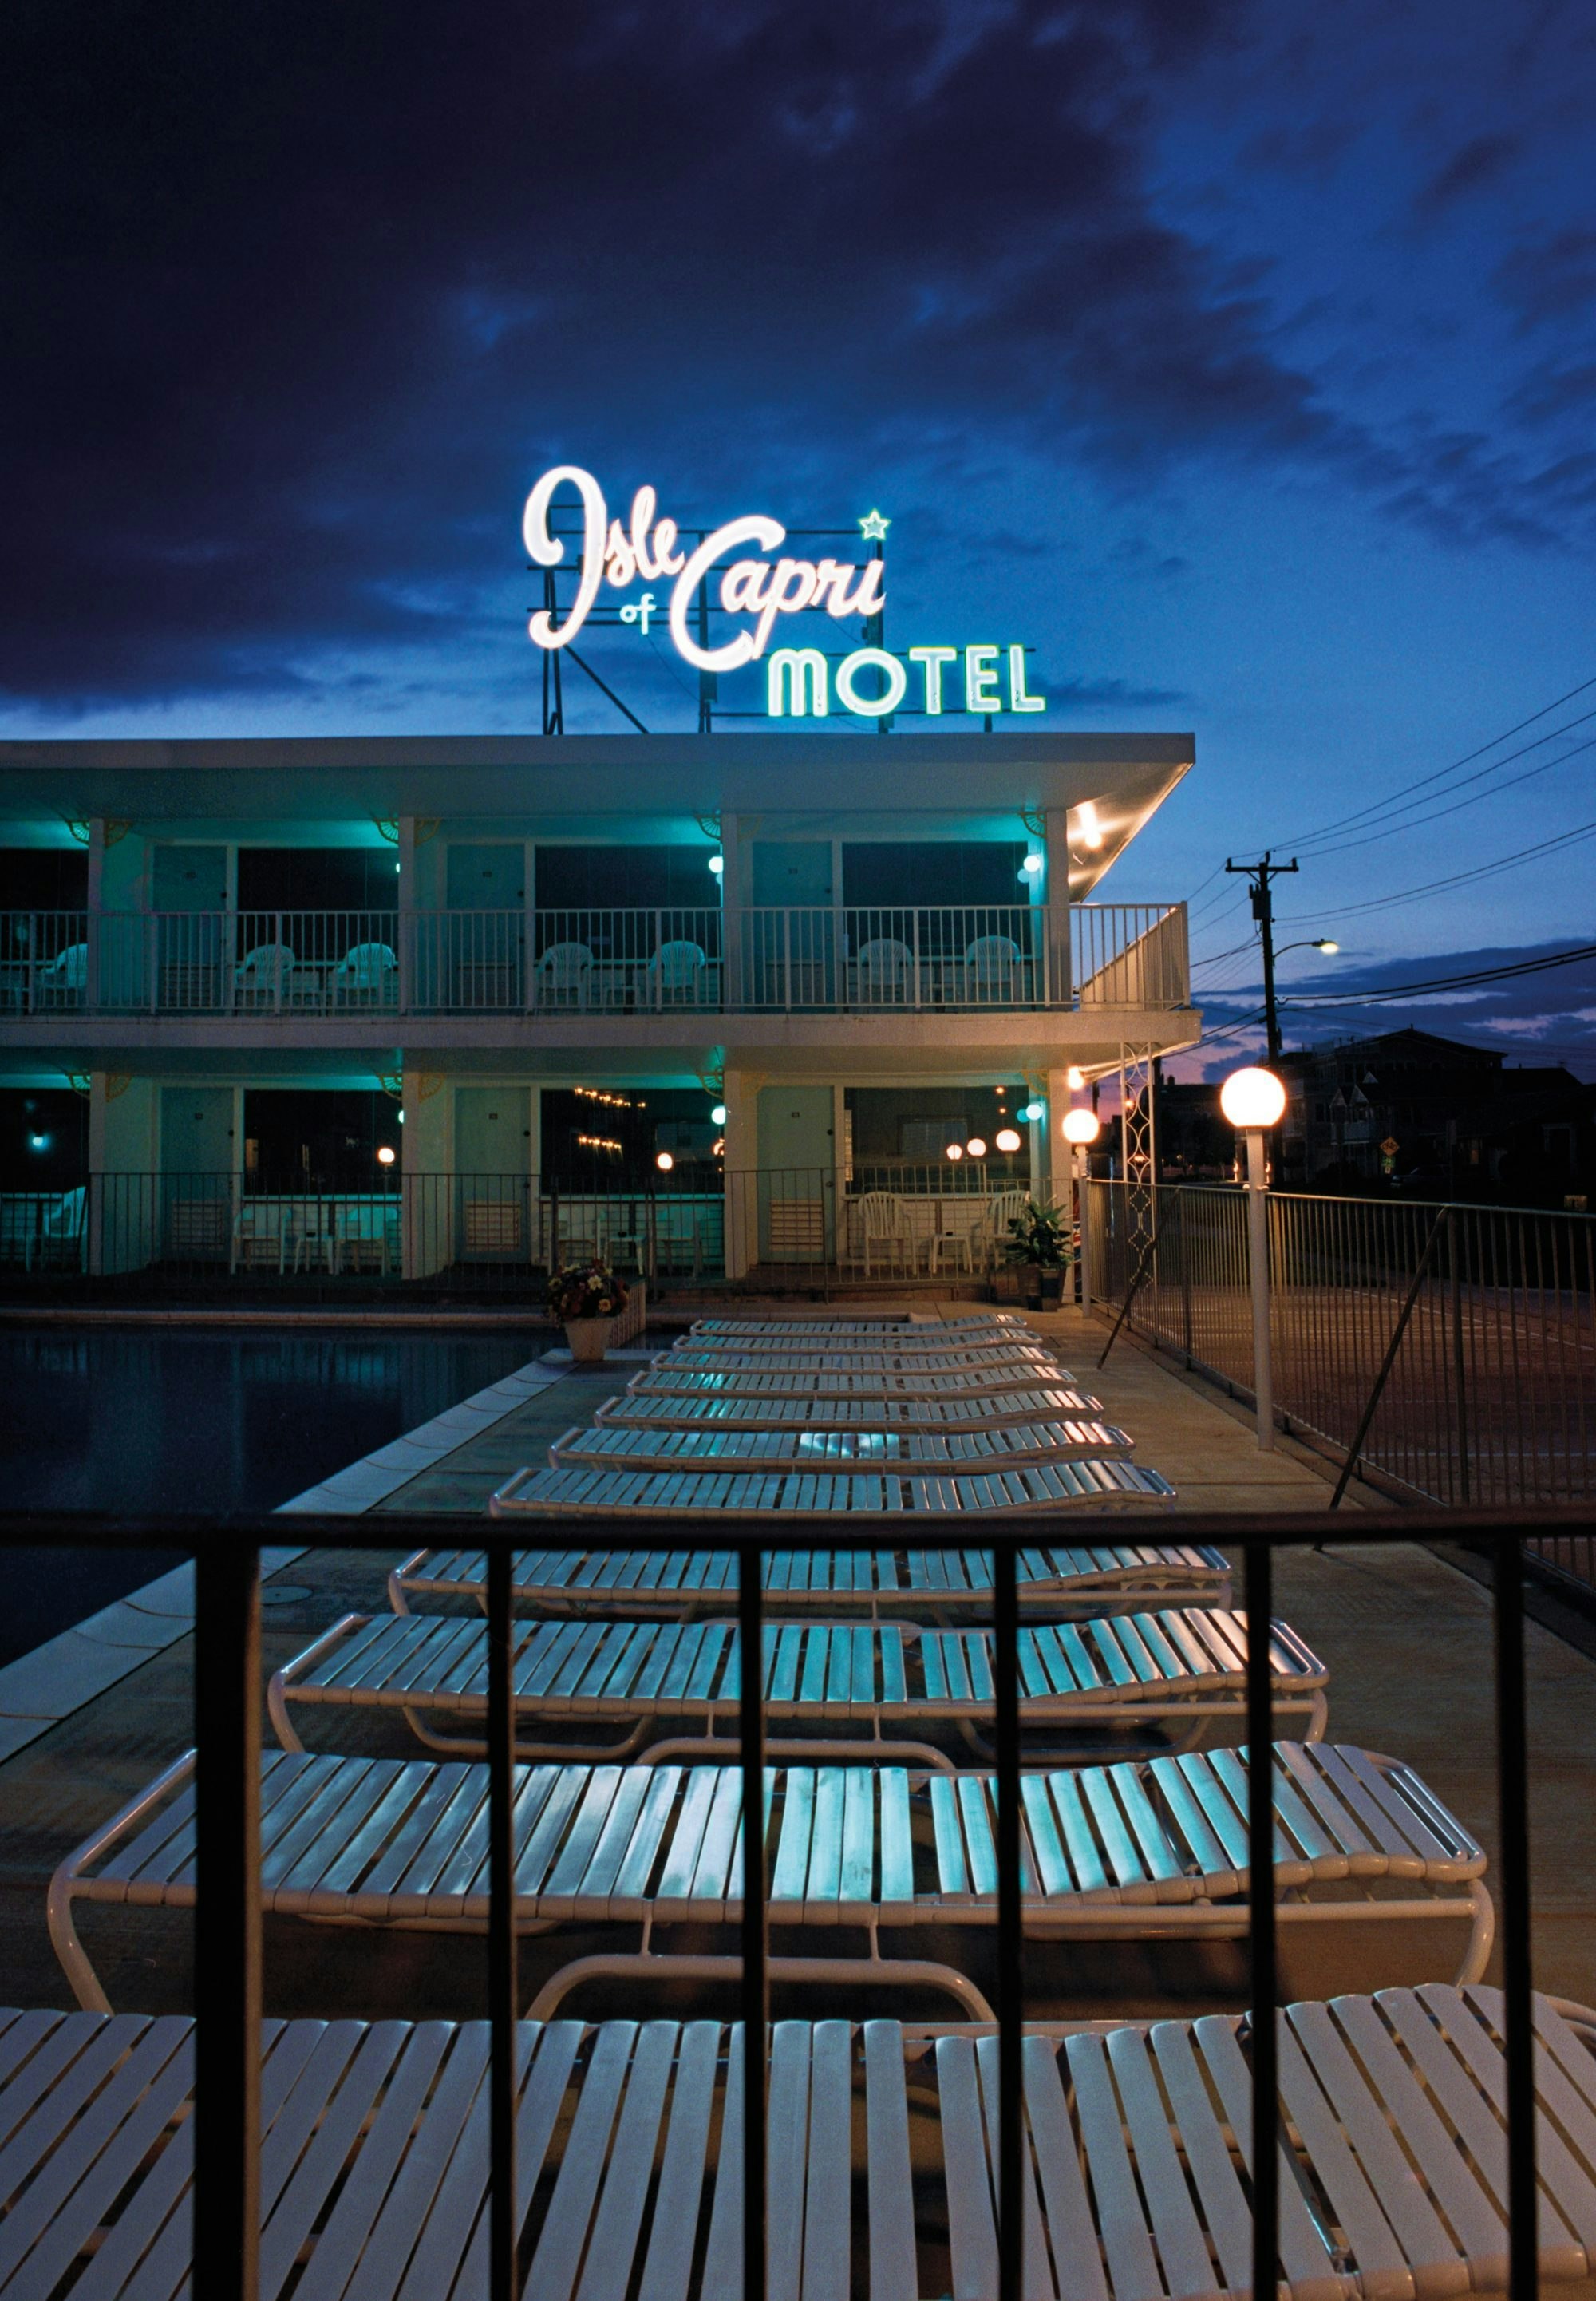 Many Wildwood motels took their names from exotic vacation locales like the Isle of Capri, photographed in 2006.